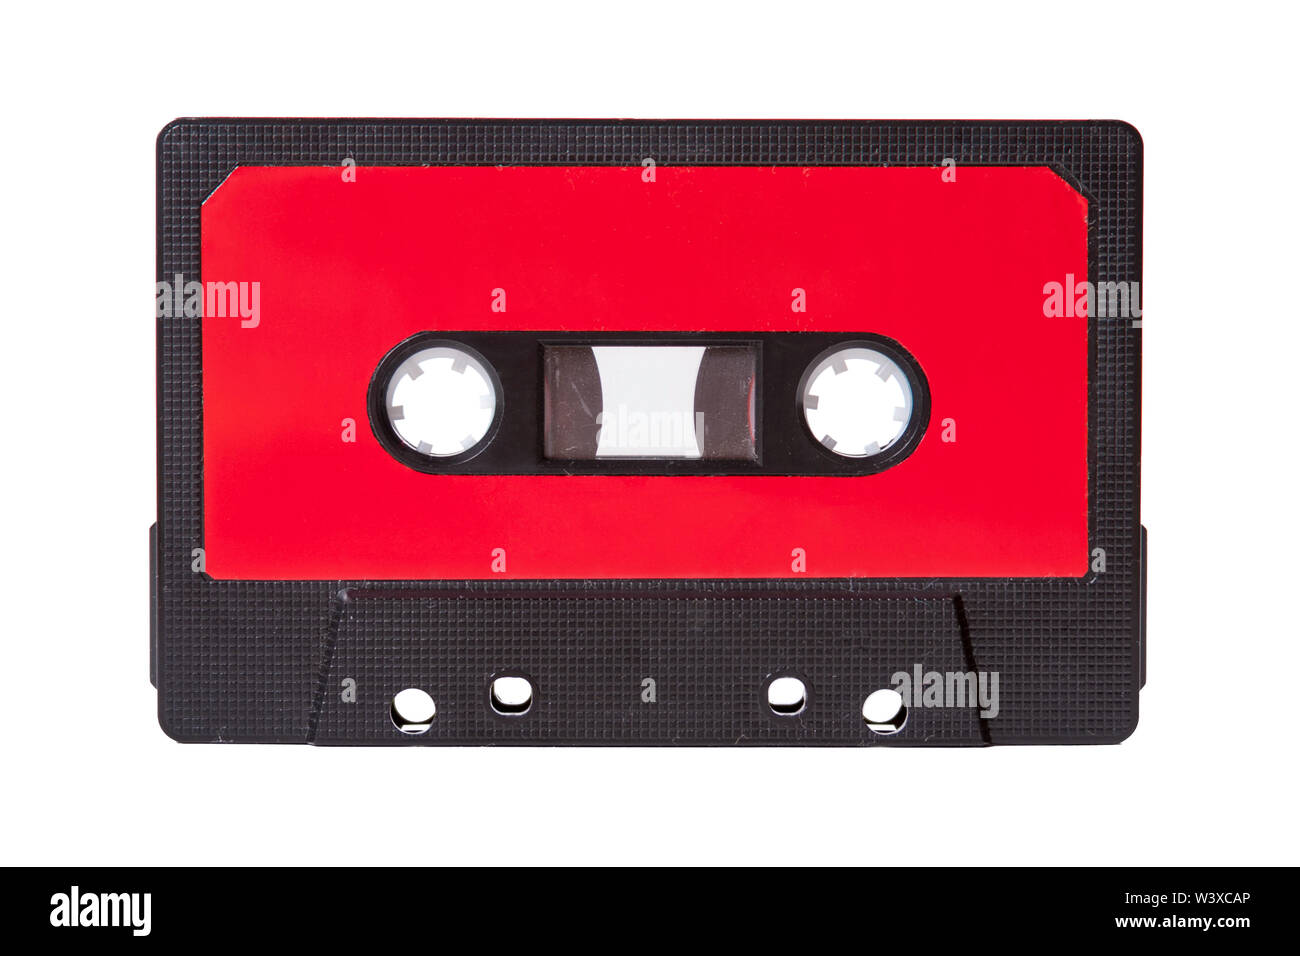 Blank red vintage cassette tape with an empty label isolated on white background, old retro audio equipment concept Stock Photo